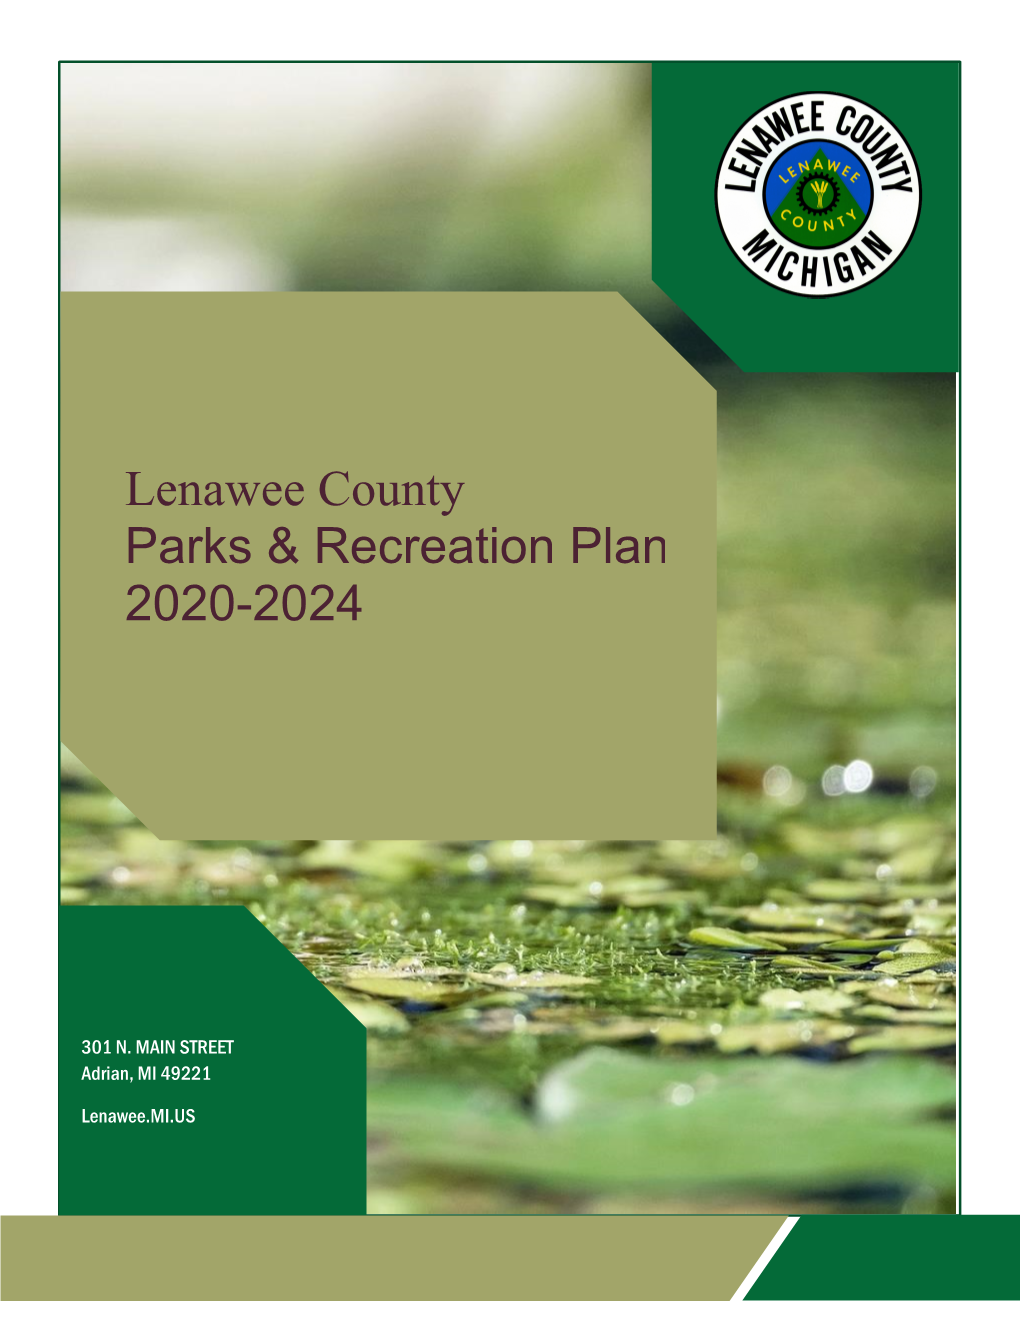 Lenawee County Parks & Recreation Plan 2020-2024